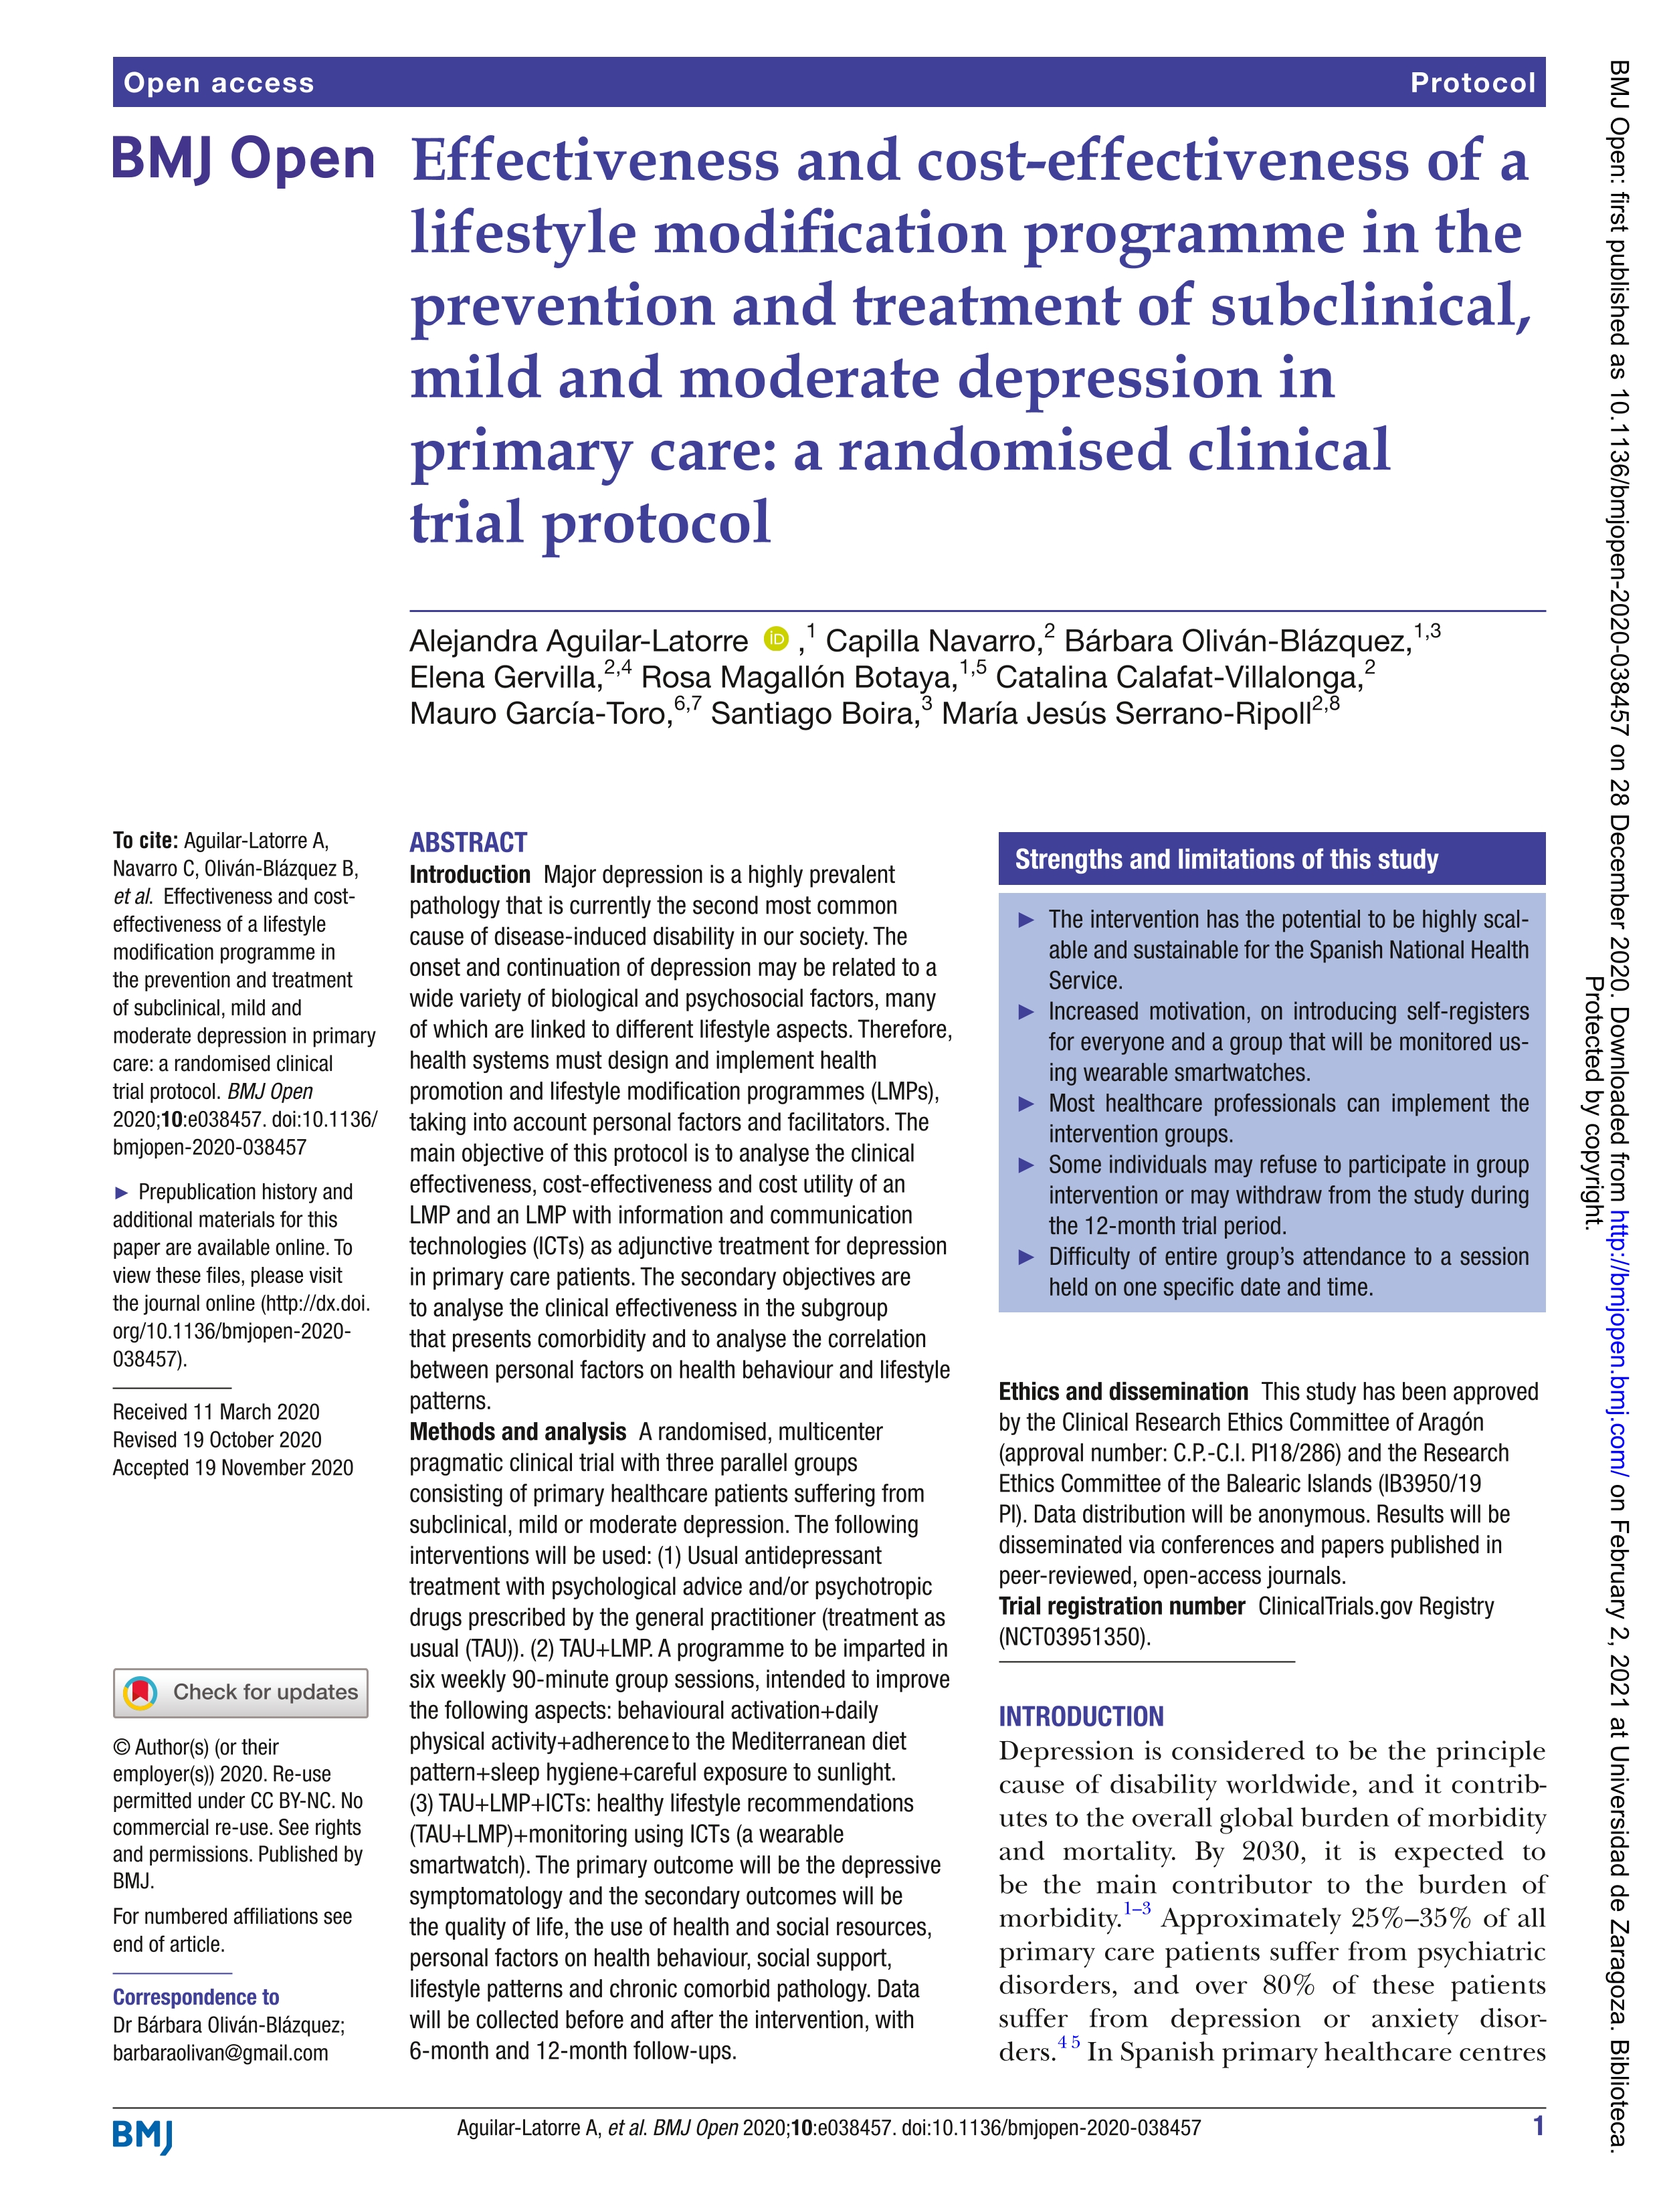 Effectiveness and cost-effectiveness of a lifestyle modification programme in the prevention and treatment of subclinical, mild and moderate depression in primary care: A randomised clinical trial protocol